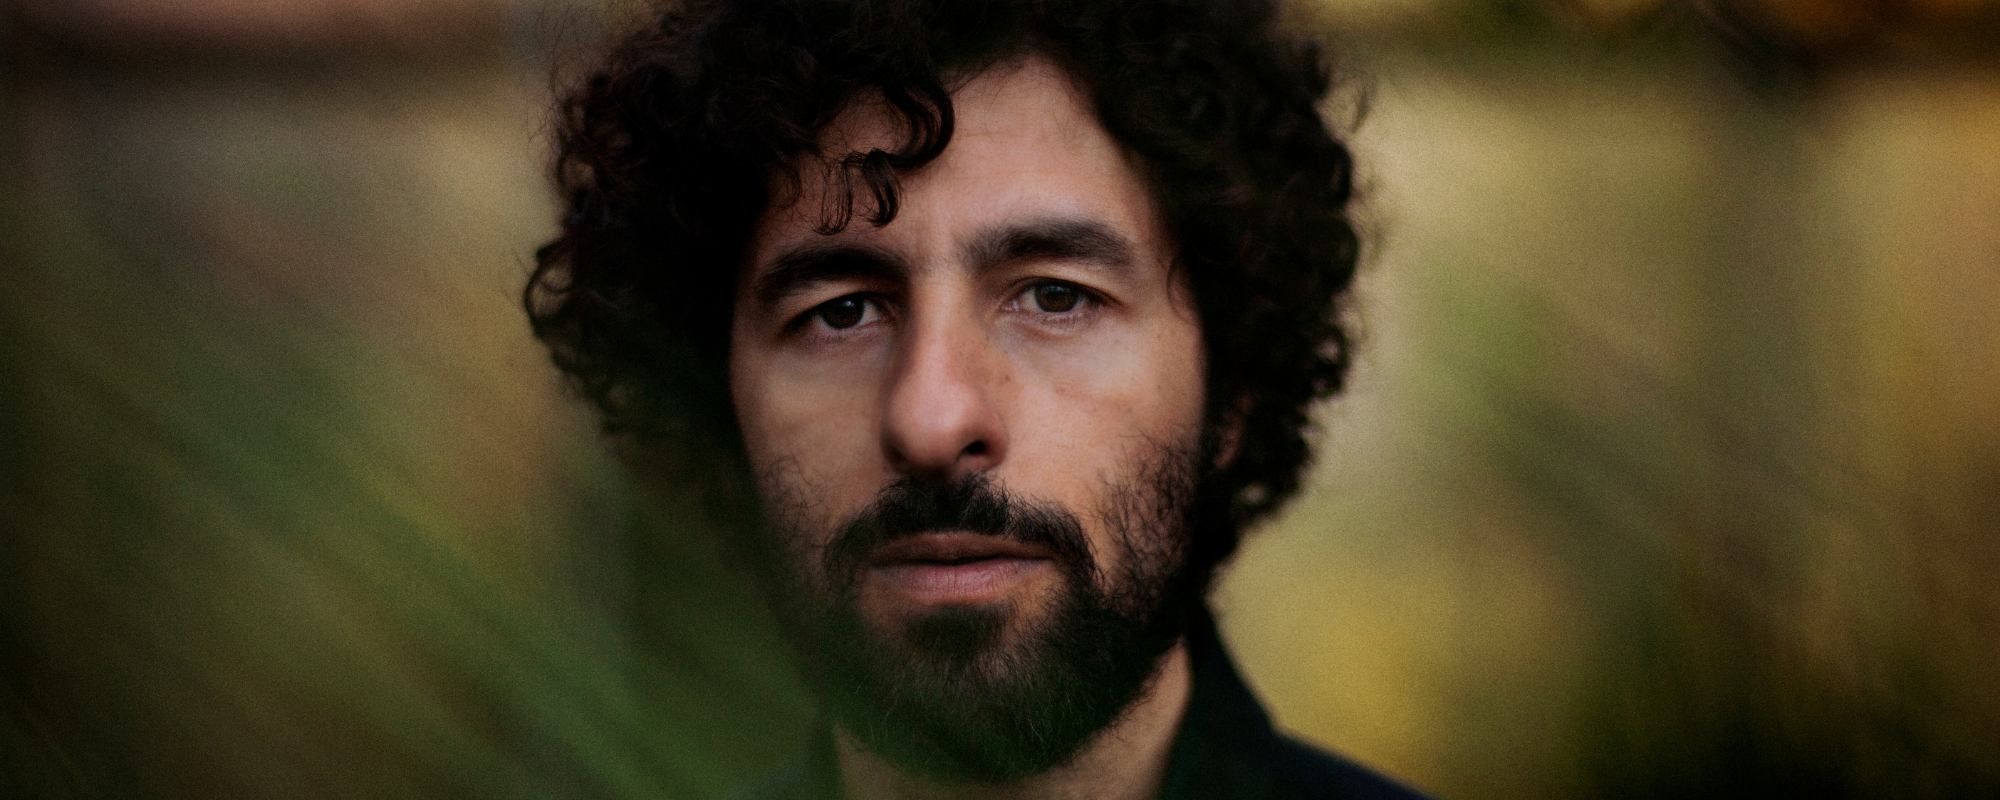 José González Releases a Moving Metaphor for The Moment with ‘Local Valley’